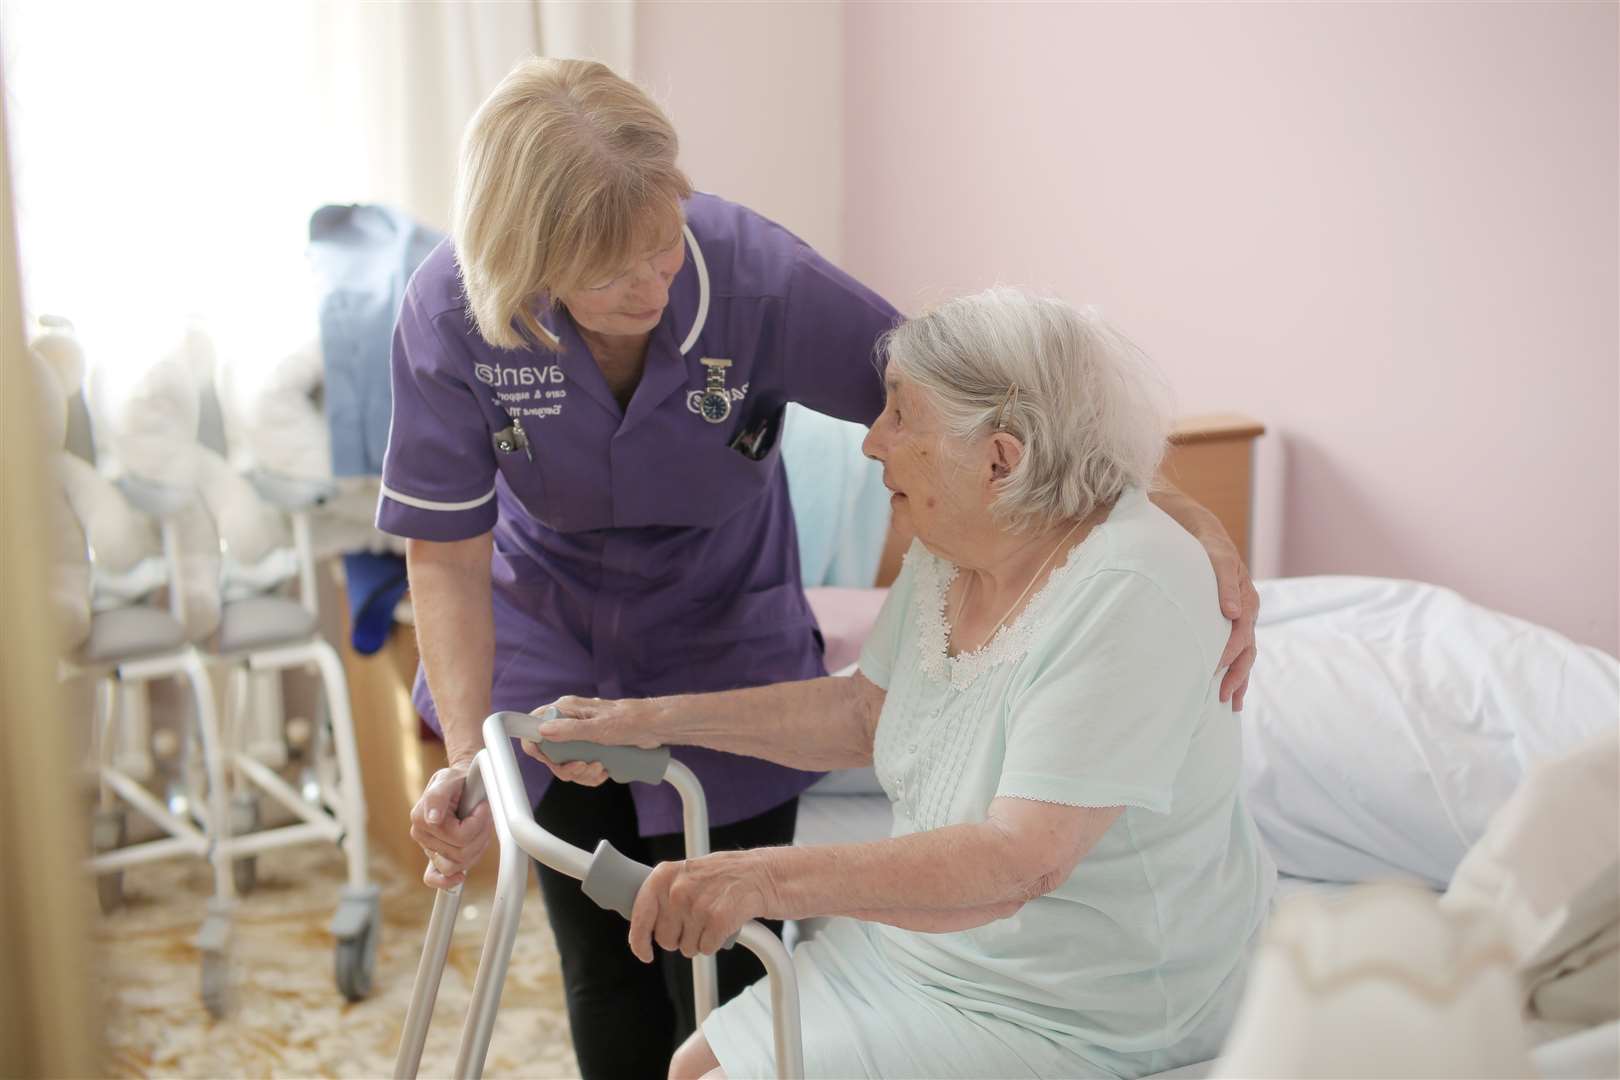 From dementia care, short stay respite breaks, home care to registered nursing care, Avante offers many different types of home care services